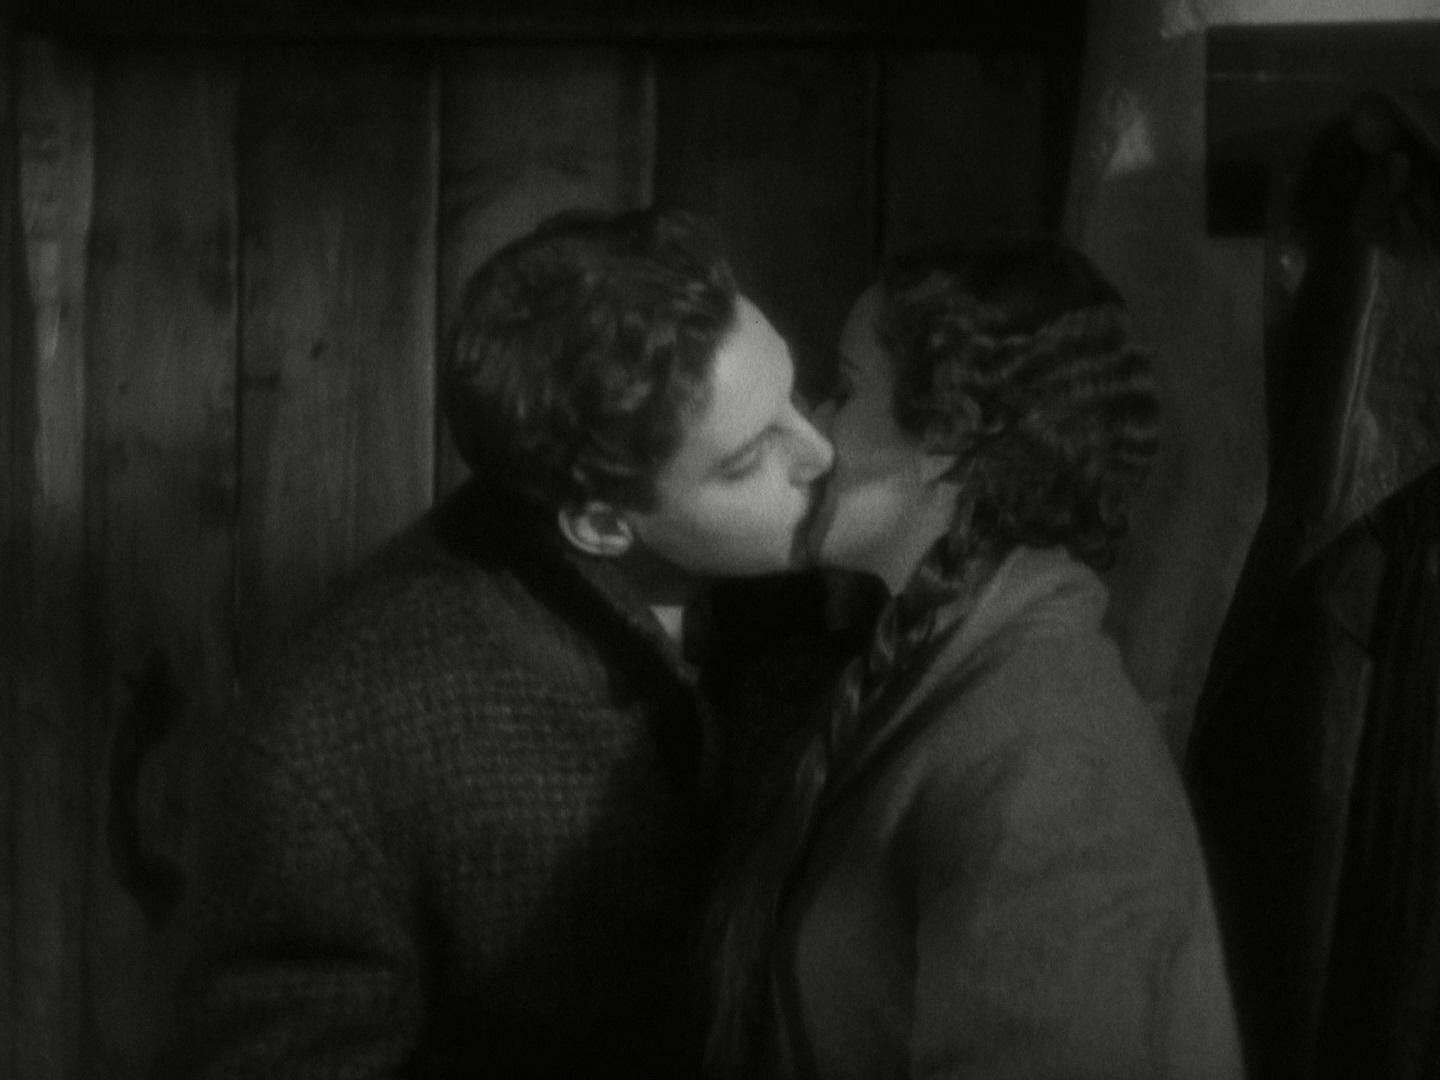 Robert Donat and Peggy Ashcroft in The 39 Steps (1935, dir. Alfred Hitchcock) UK Network Blu-ray